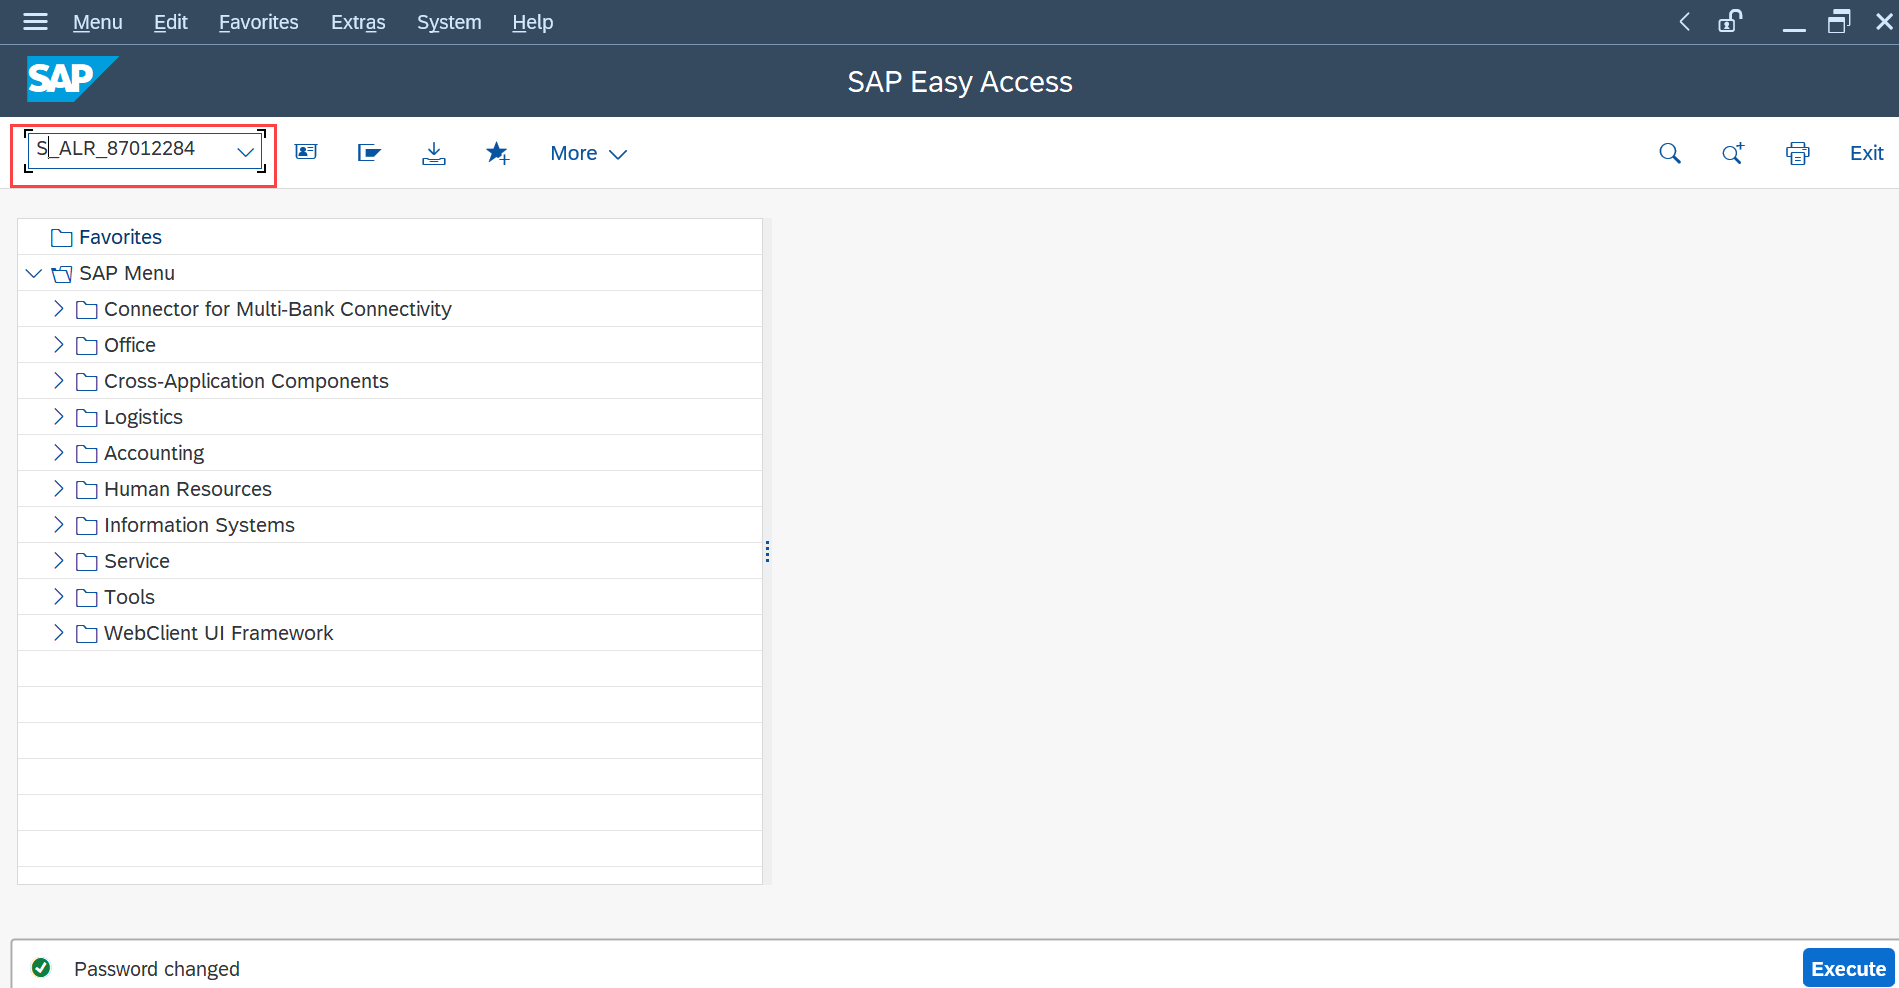 The transaction code entered in the SAP menu bar.